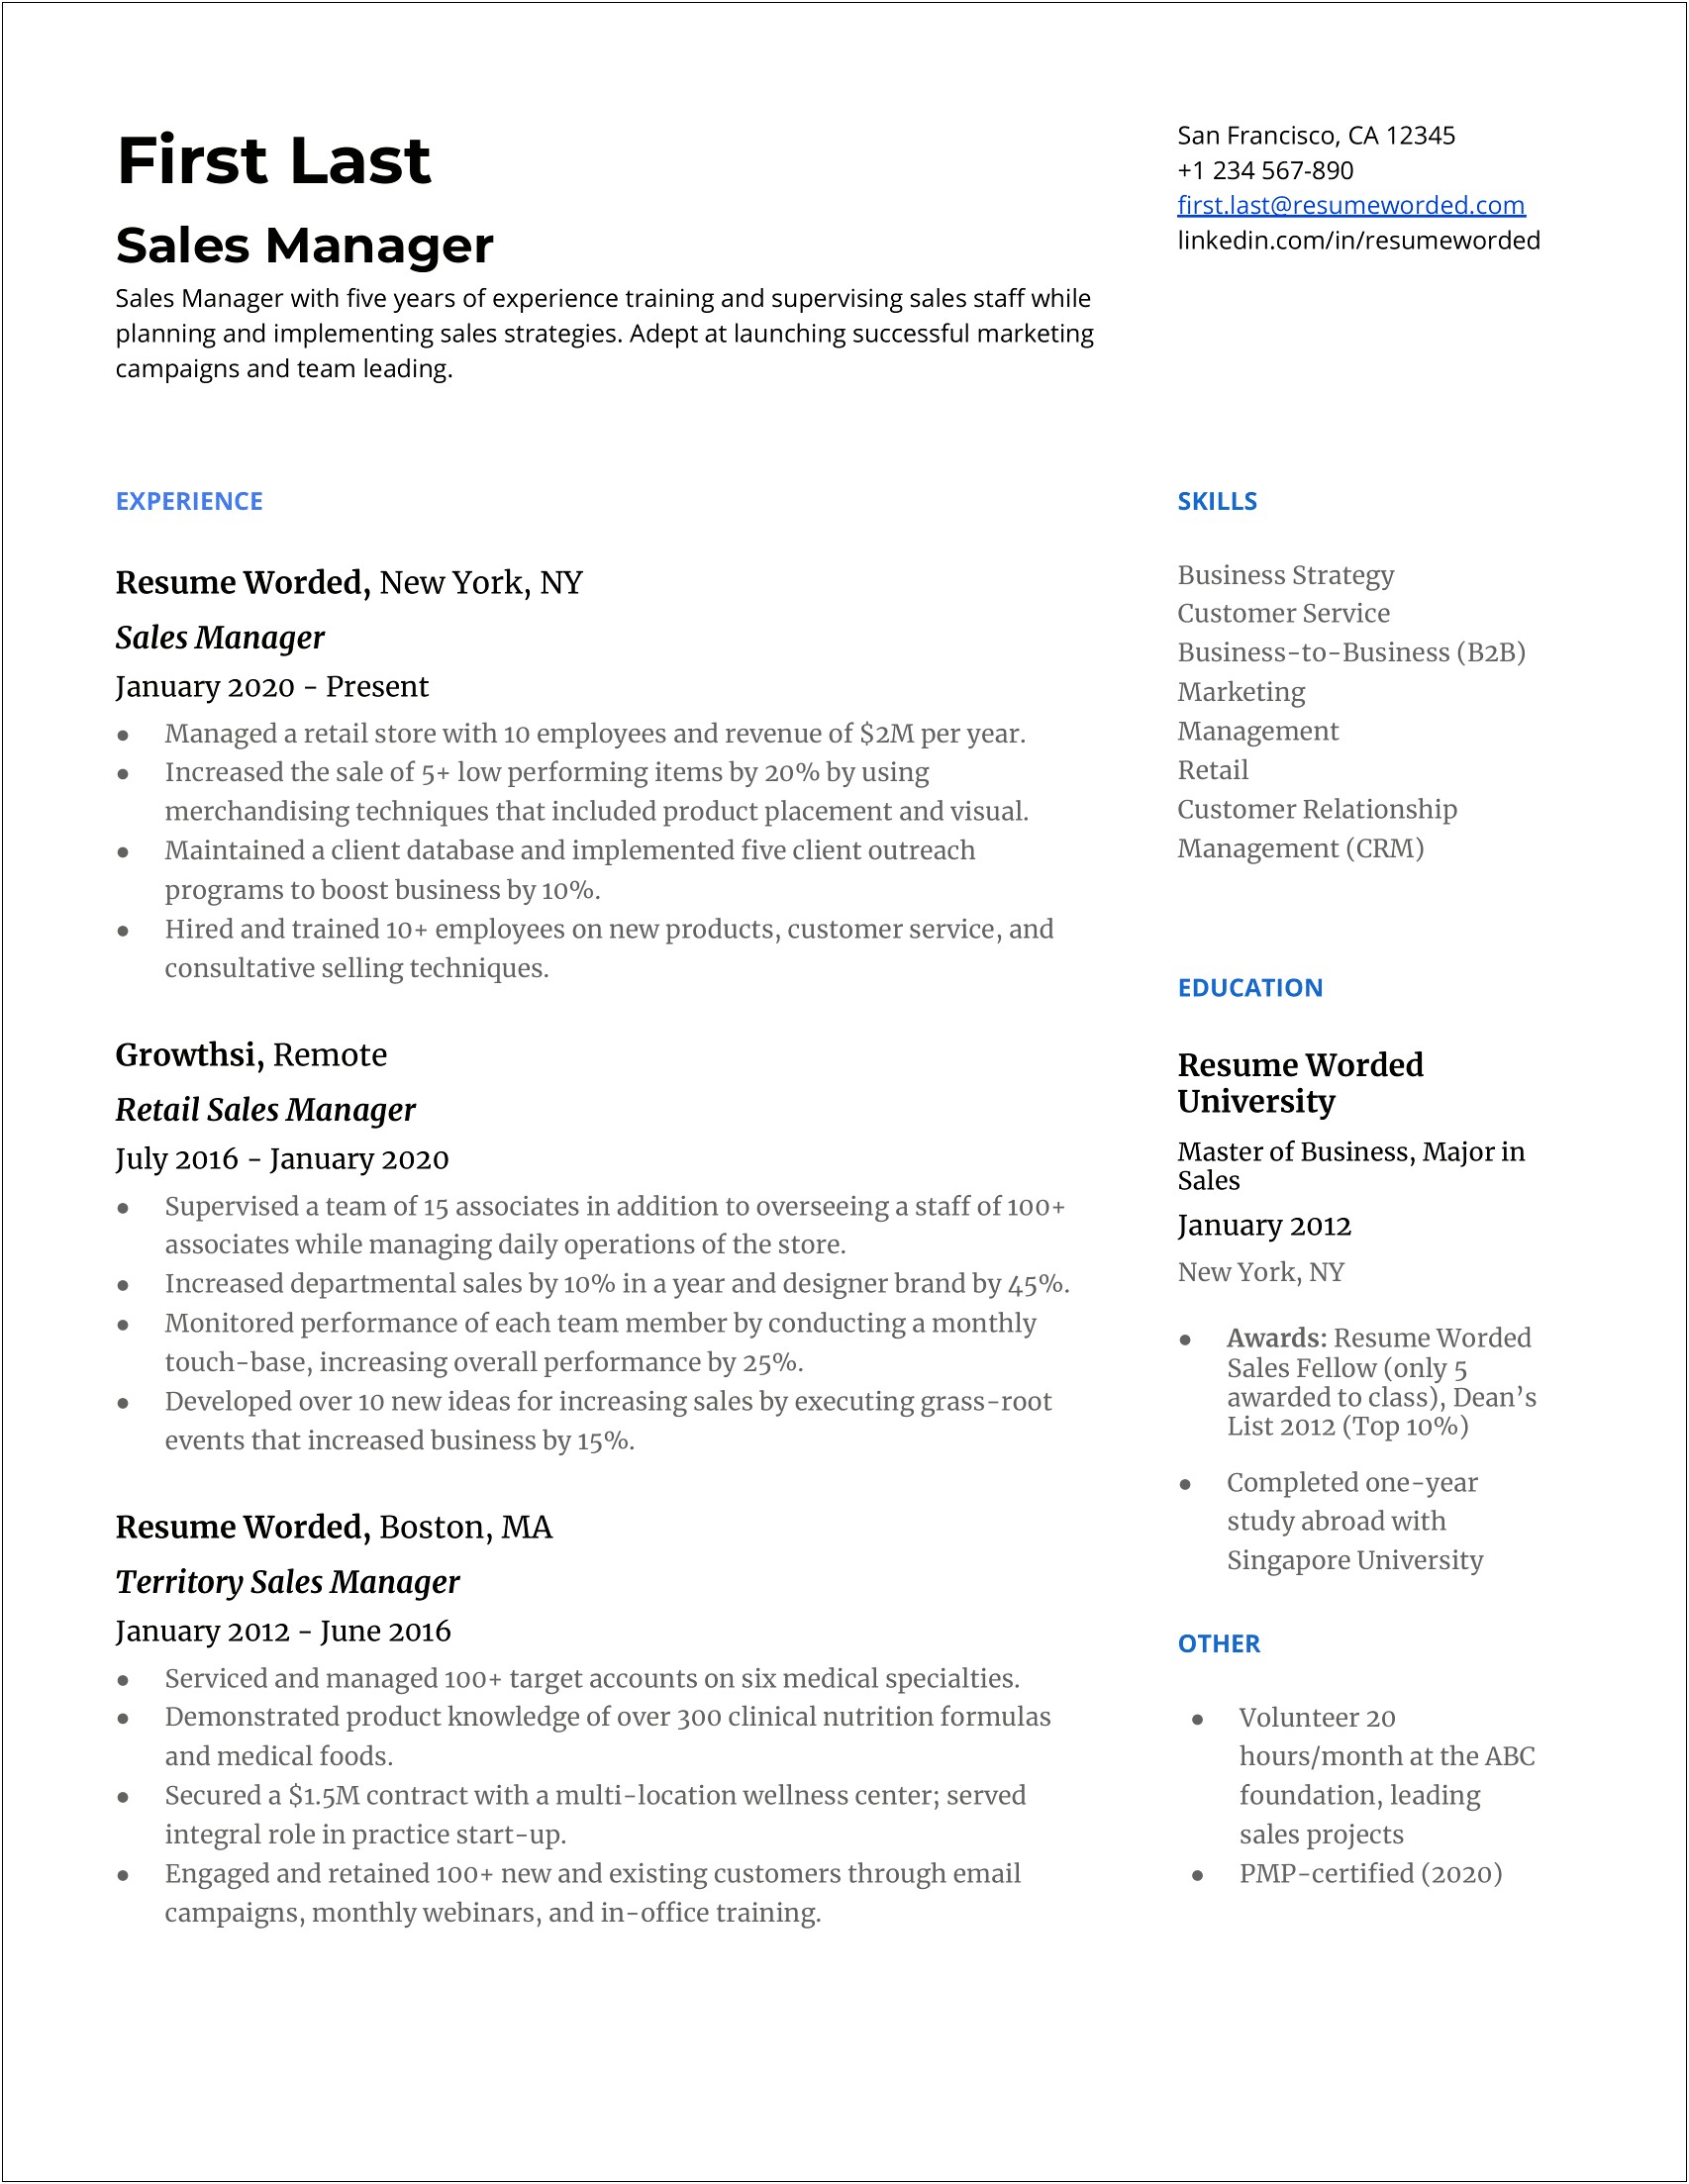 Resume Objective Statement Sales Manager